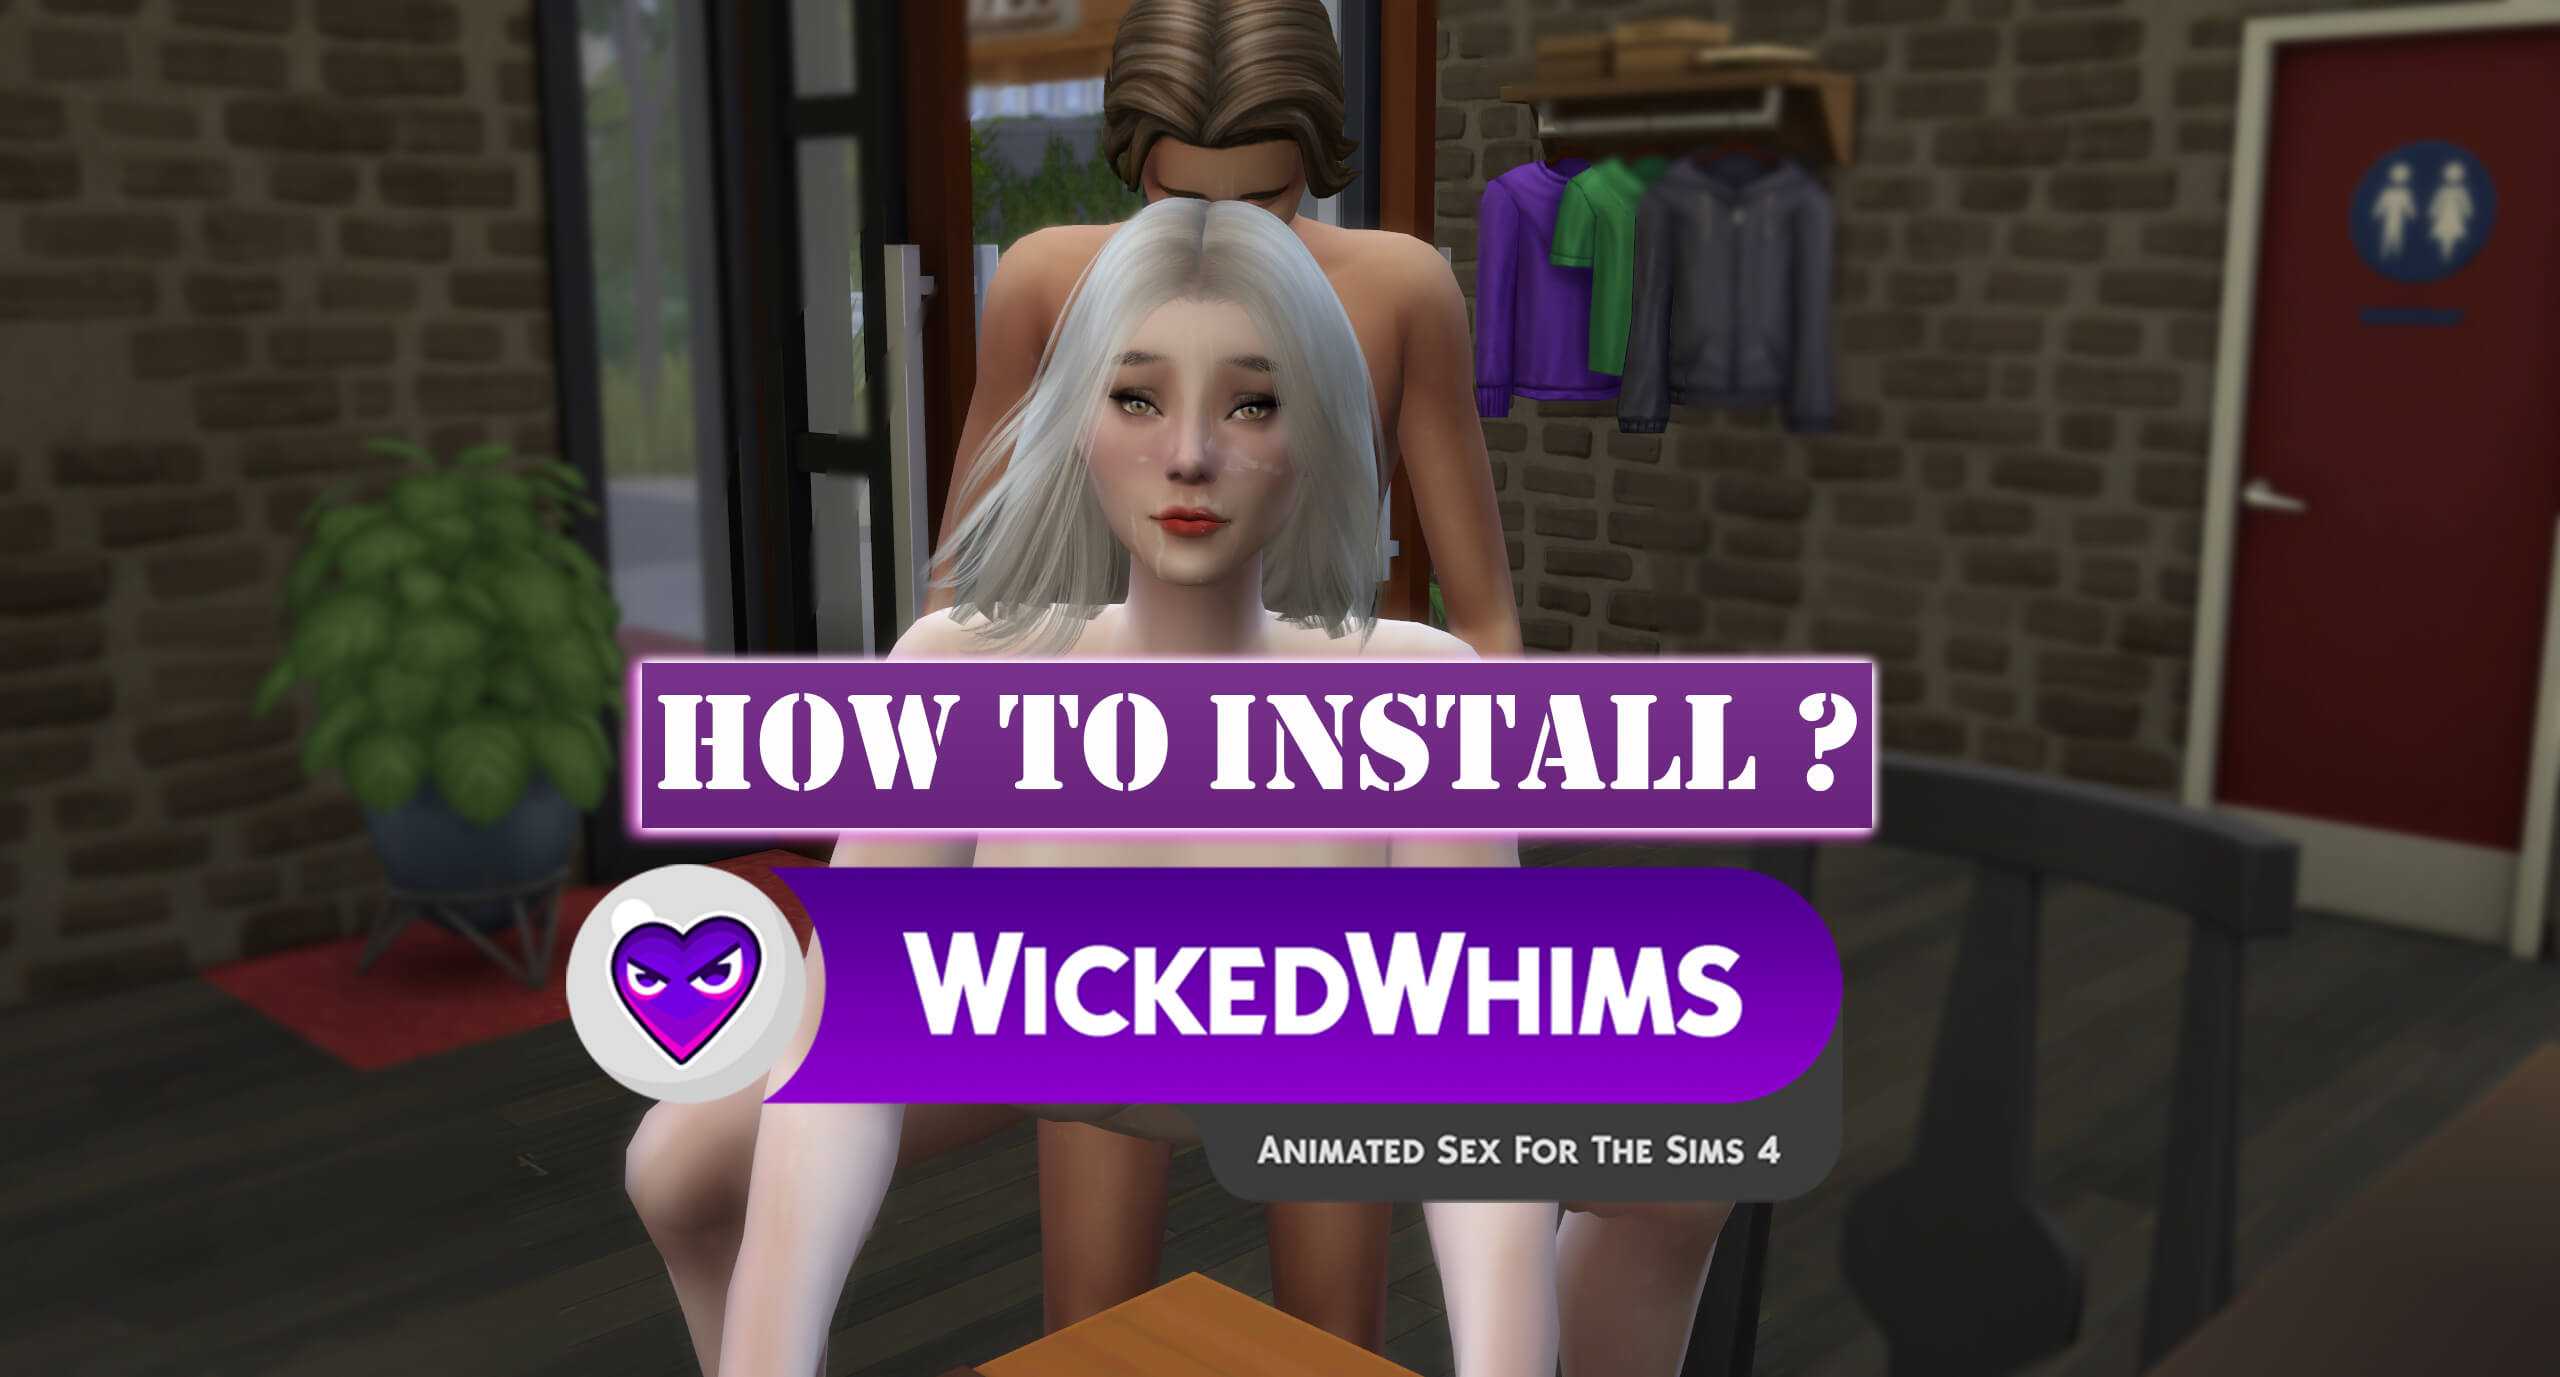 Wicked whims sims 4 русификатор последняя версия. Whims SIMS 4. Фарфоровая кукла Wicked whims. Wicked whims SIMS 4 симс 4. SIMS 4 wickedwhims последняя версия.